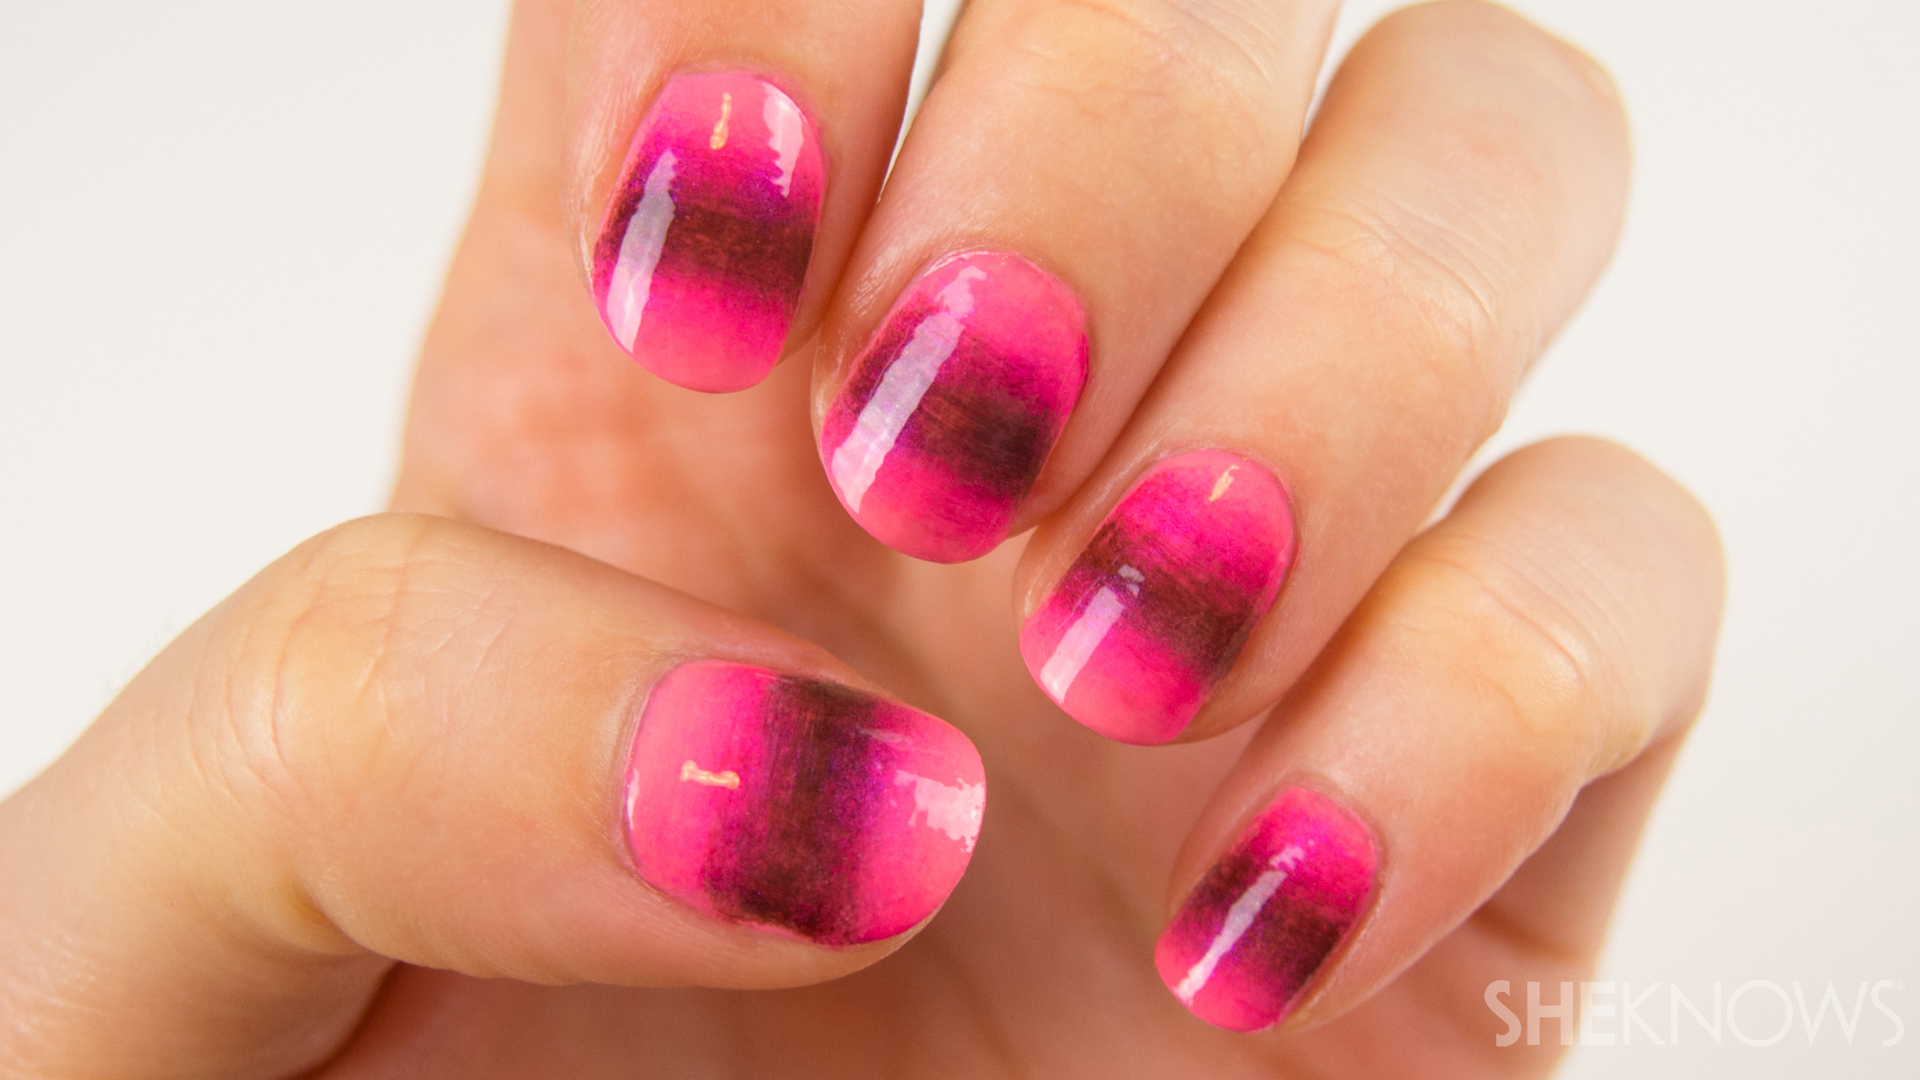 Nail art tutorial: A new take on the ombre nail design